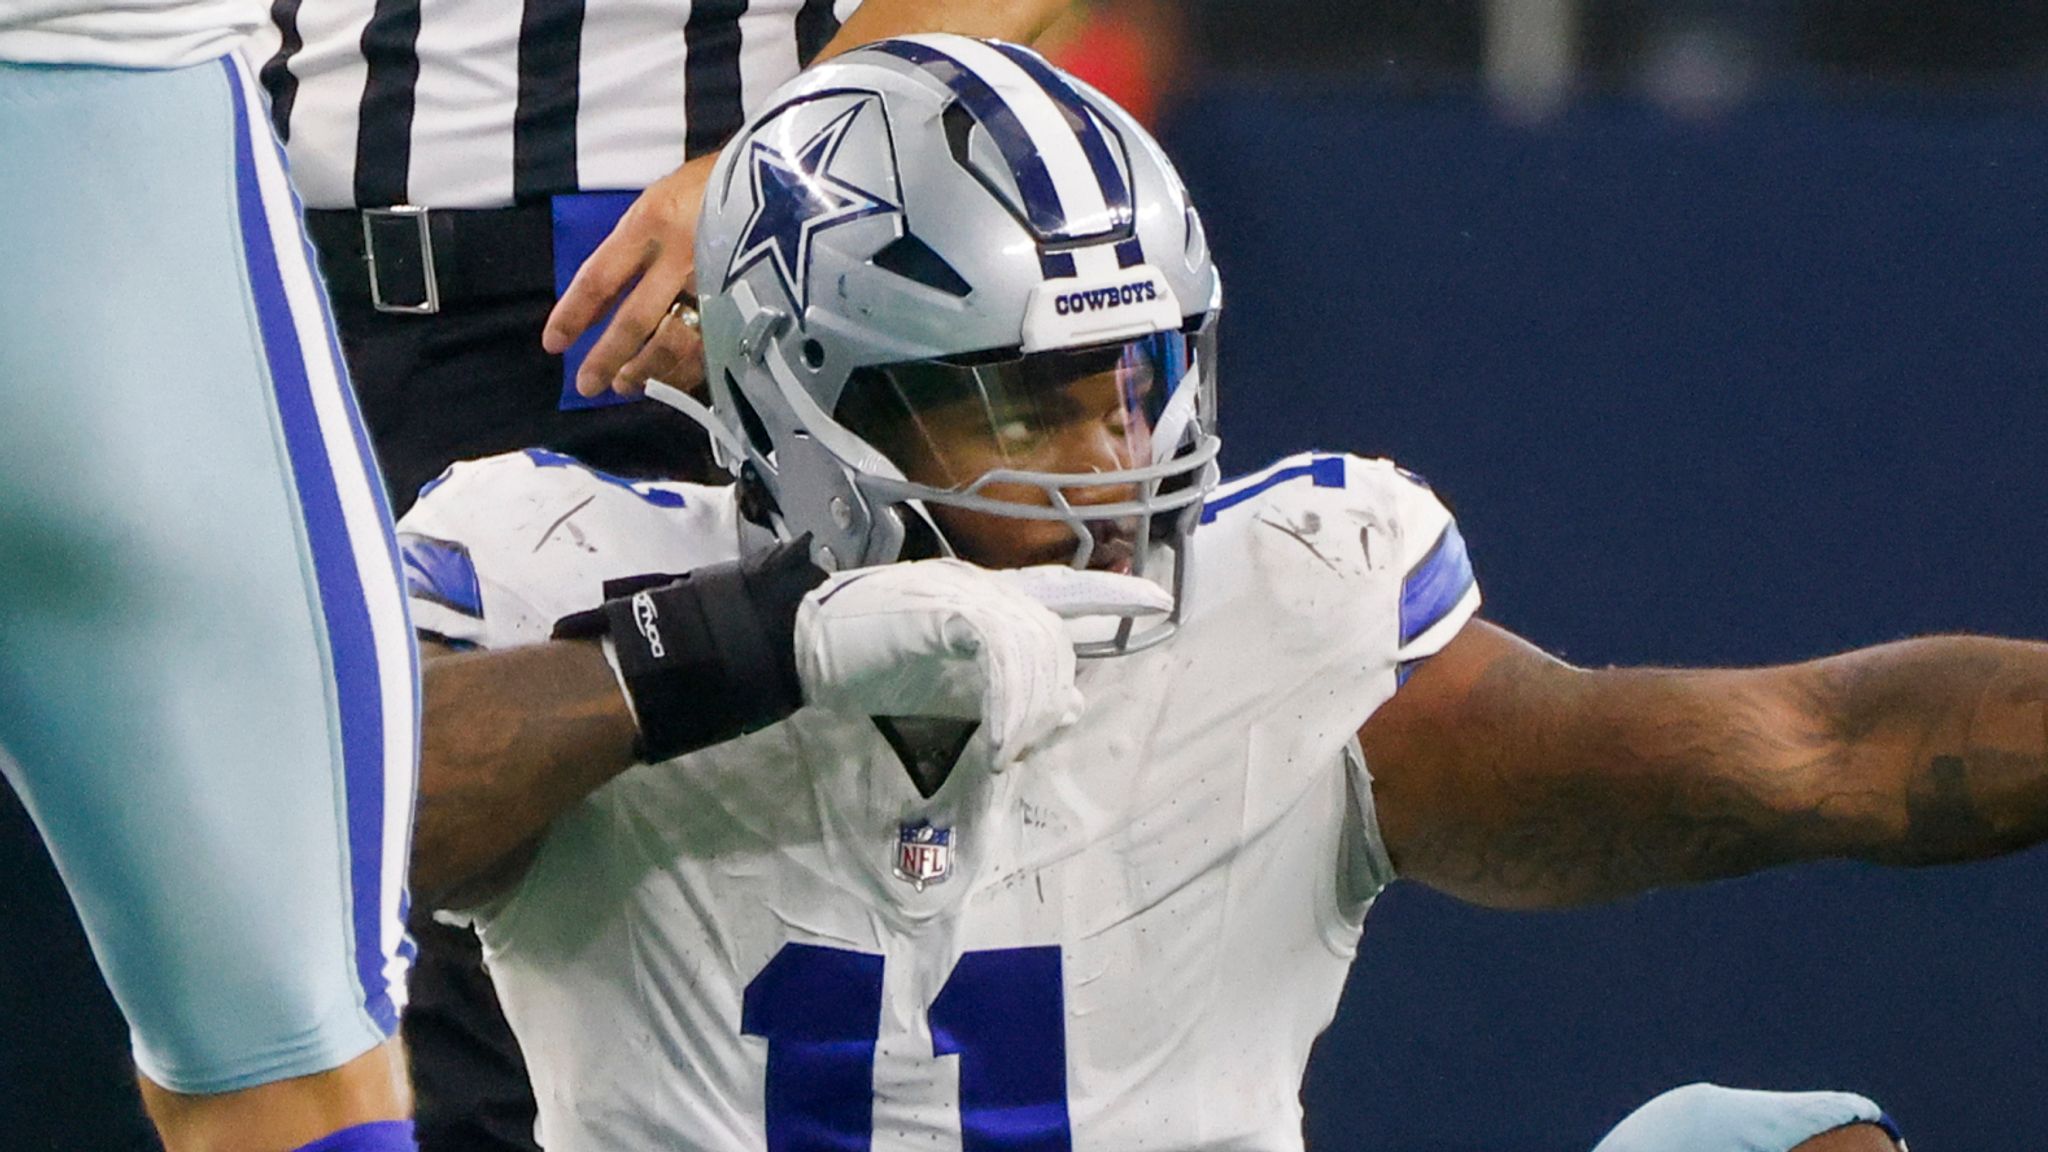 Cowboys star Micah Parsons posted a video throwing hands, can